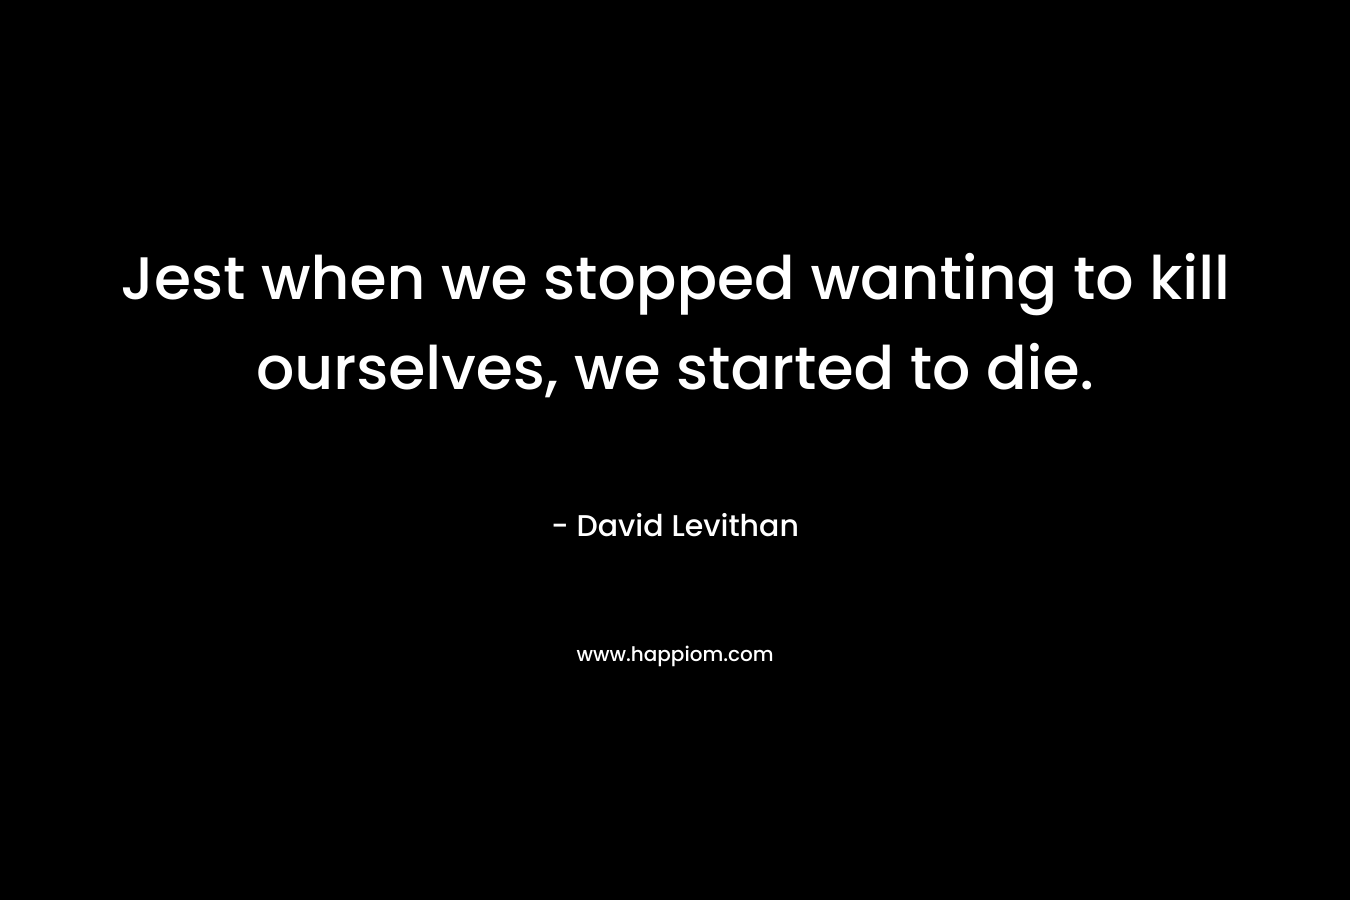 Jest when we stopped wanting to kill ourselves, we started to die. – David Levithan